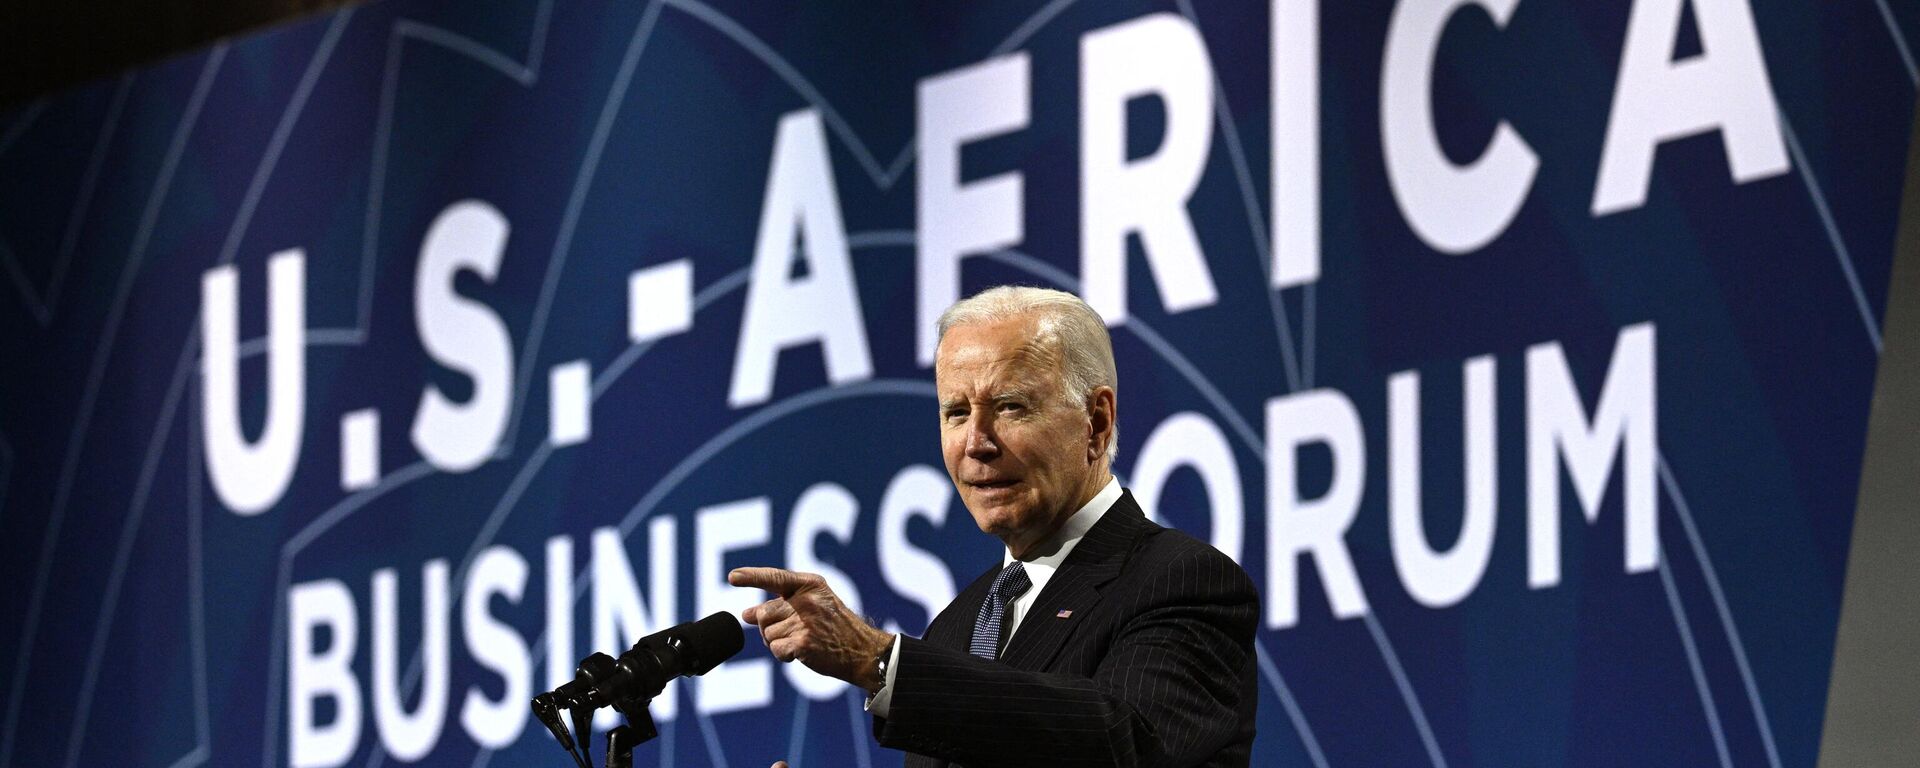 US President Joe Biden speaks at the US-Africa Business Forum during the US-Africa Leaders Summit at the Walter E. Washington Convention Center in Washington, DC on December 14, 2022.  - Sputnik International, 1920, 15.12.2022